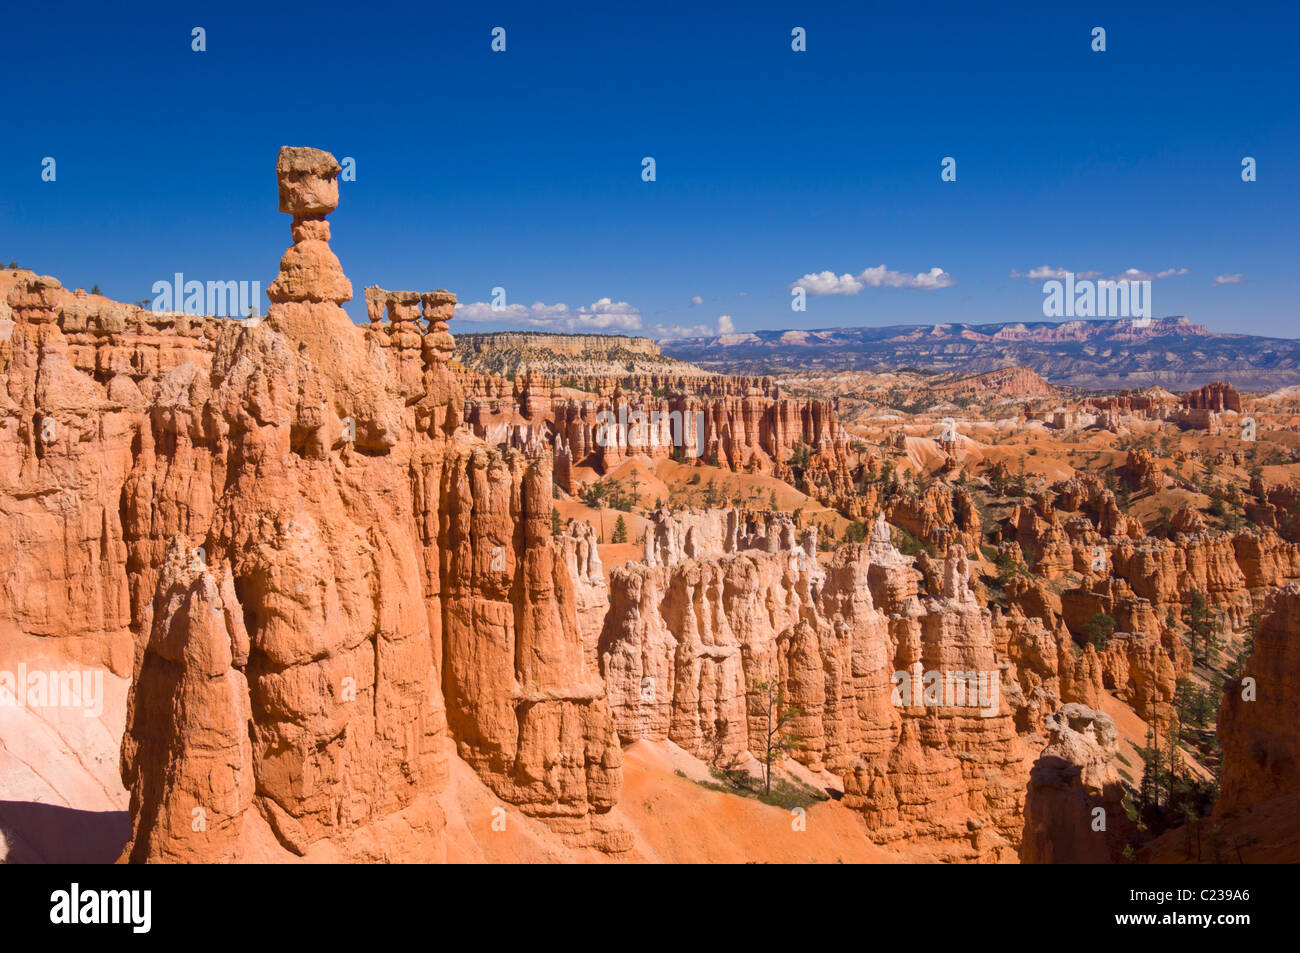 Bryce Canyon National Park Thor's Hammer and Sandstone Hoodoos in Bryce Canyon Amphitheatre Utah USA United States of America Stock Photo